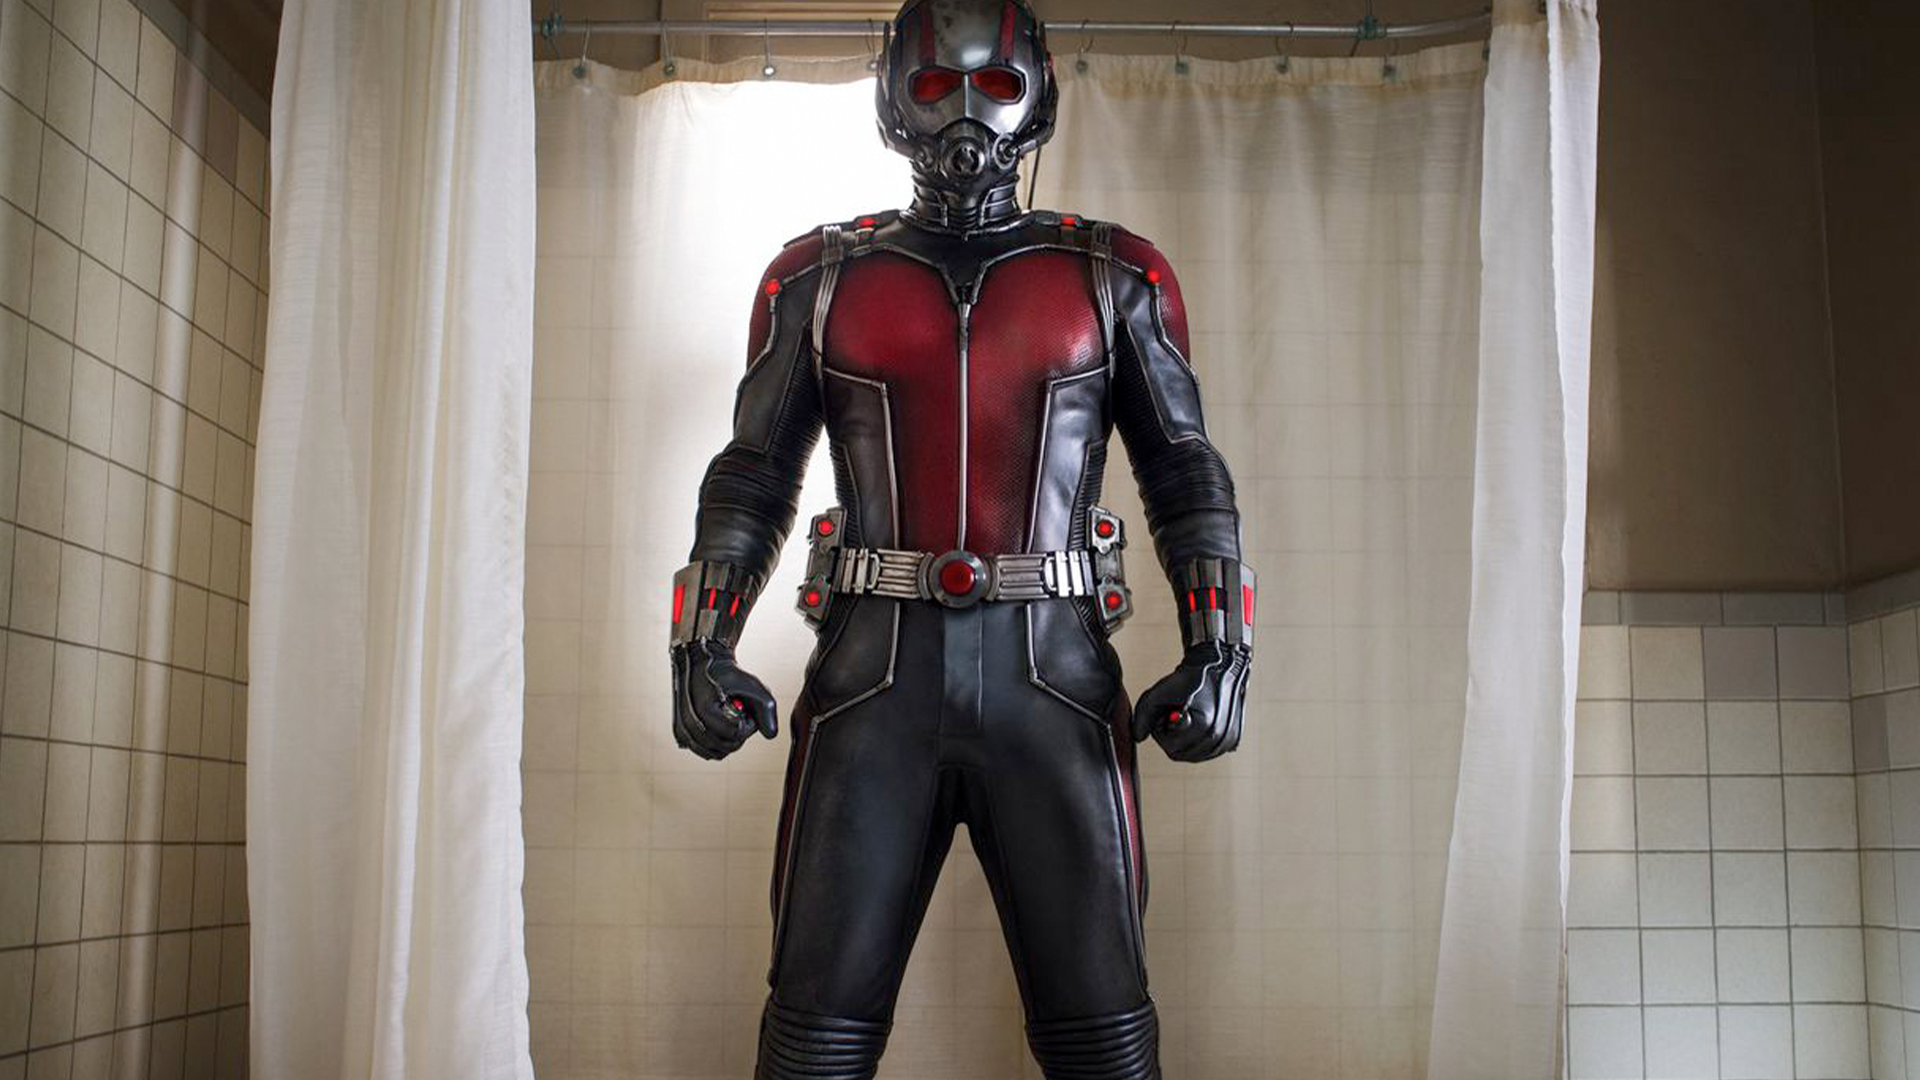 Ant-Man standing in a bath